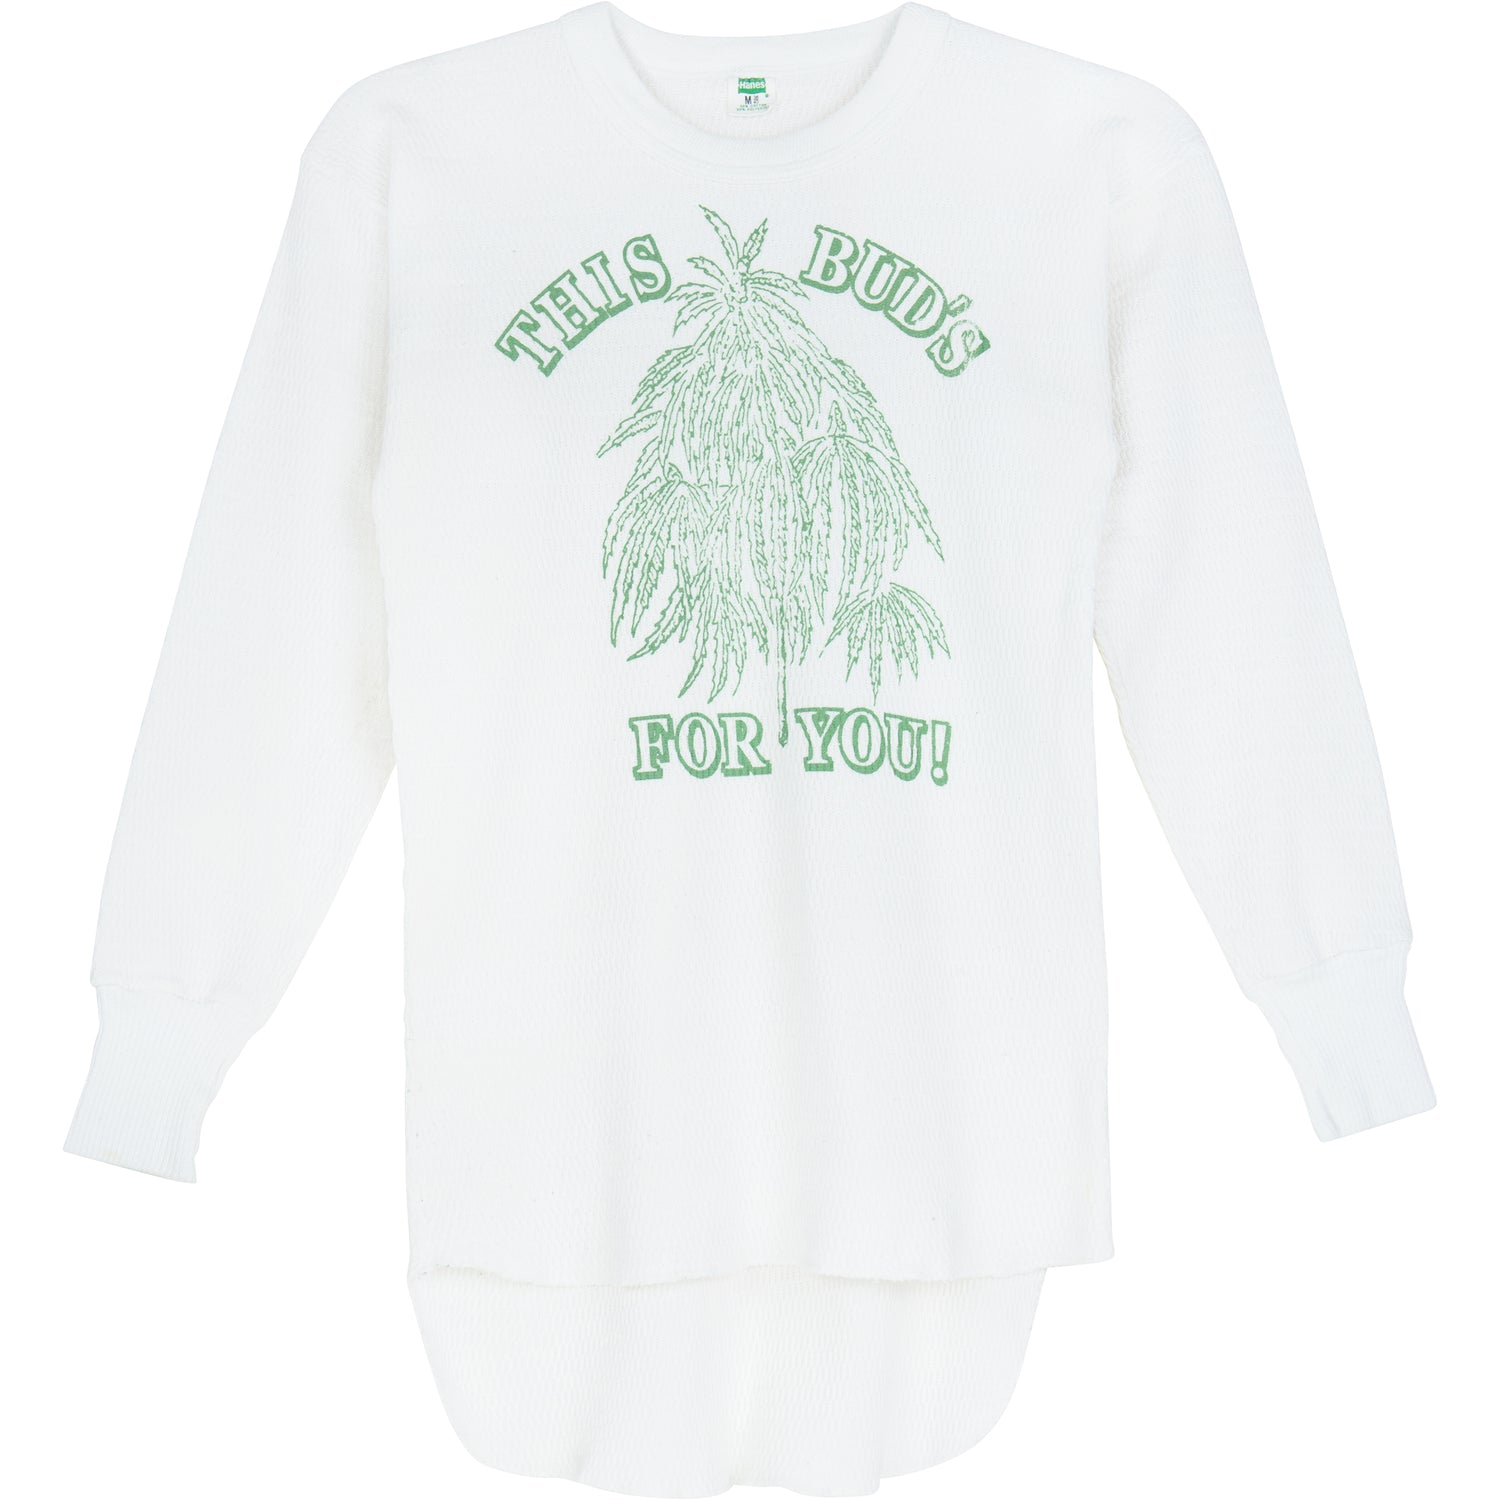 VINTAGE THIS BUDS FOR YOU THERMAL LONG SLEEVE TEE - WHITE - WEED - SIZE S